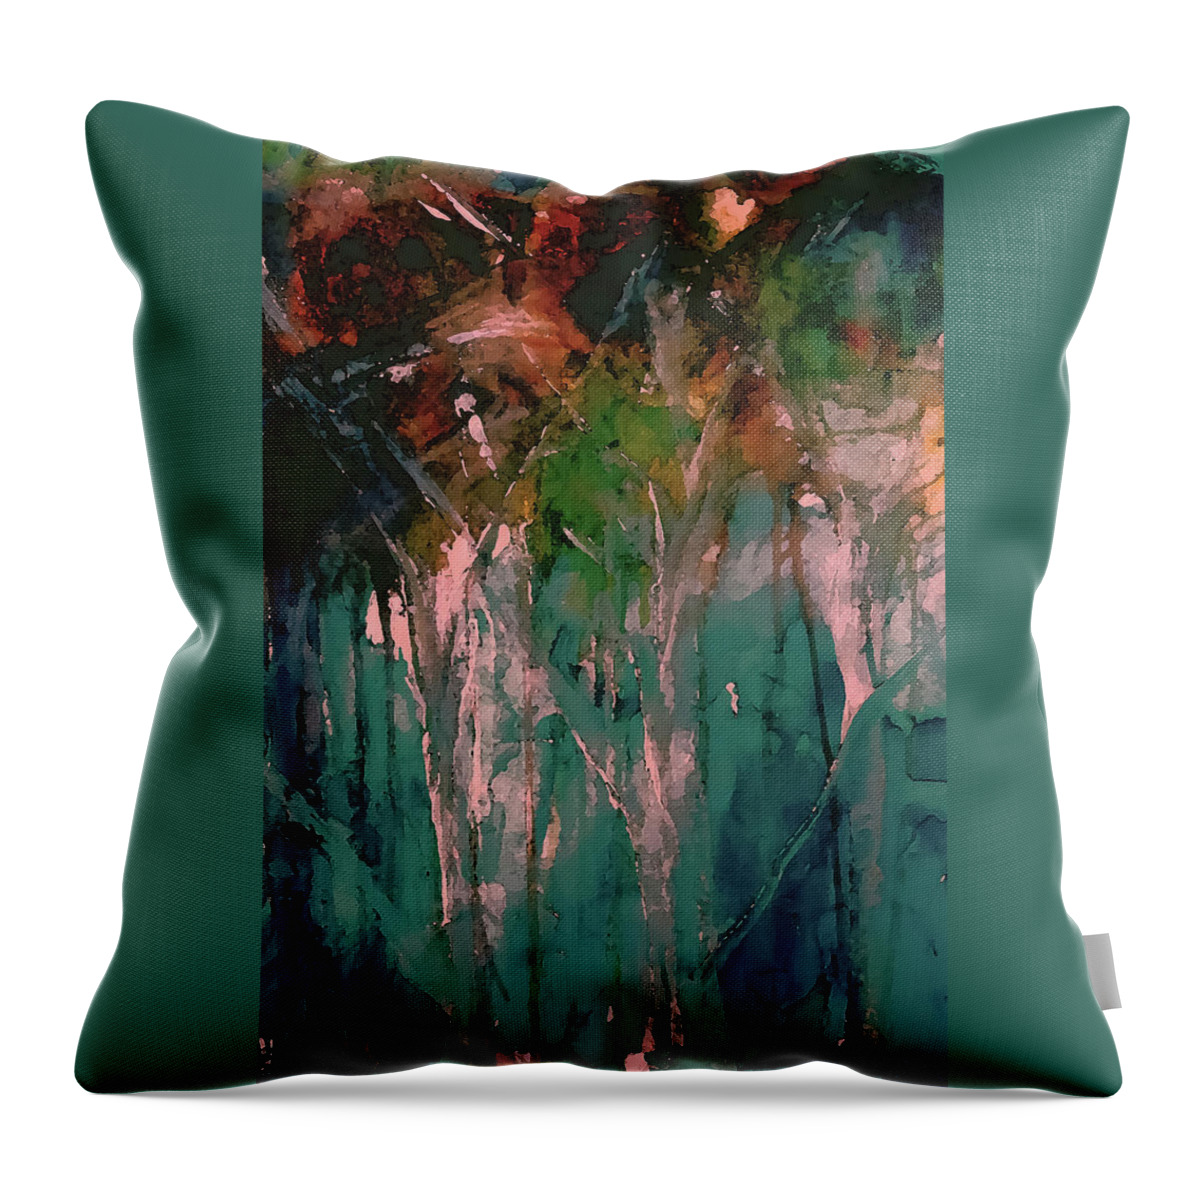 Woodland Throw Pillow featuring the painting In The Woodland Area by Lisa Kaiser